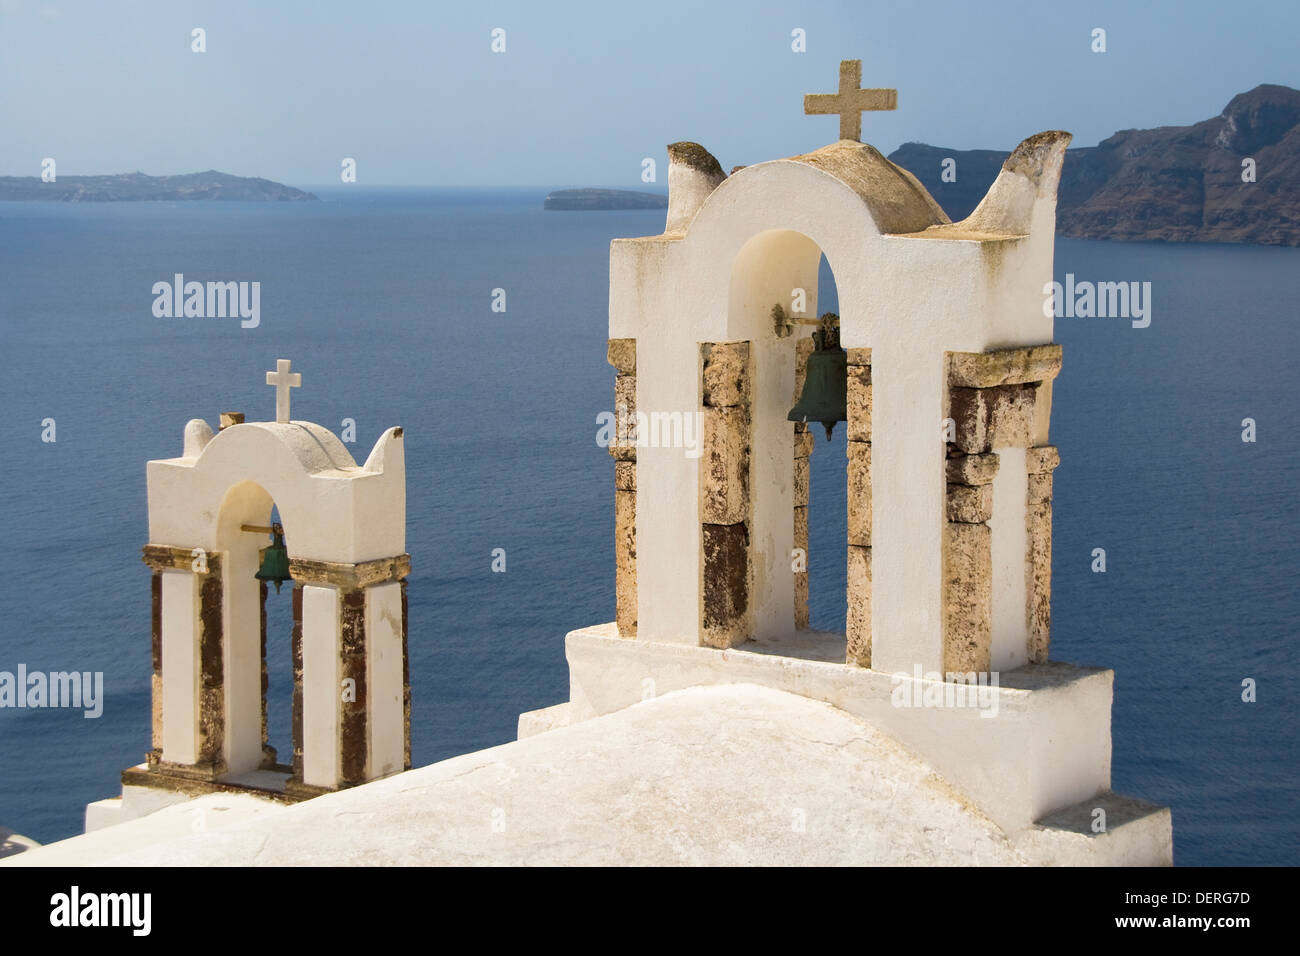 Church belfry in Oia with the Caldera in the background, Santorini Island, Greece. Stock Photo